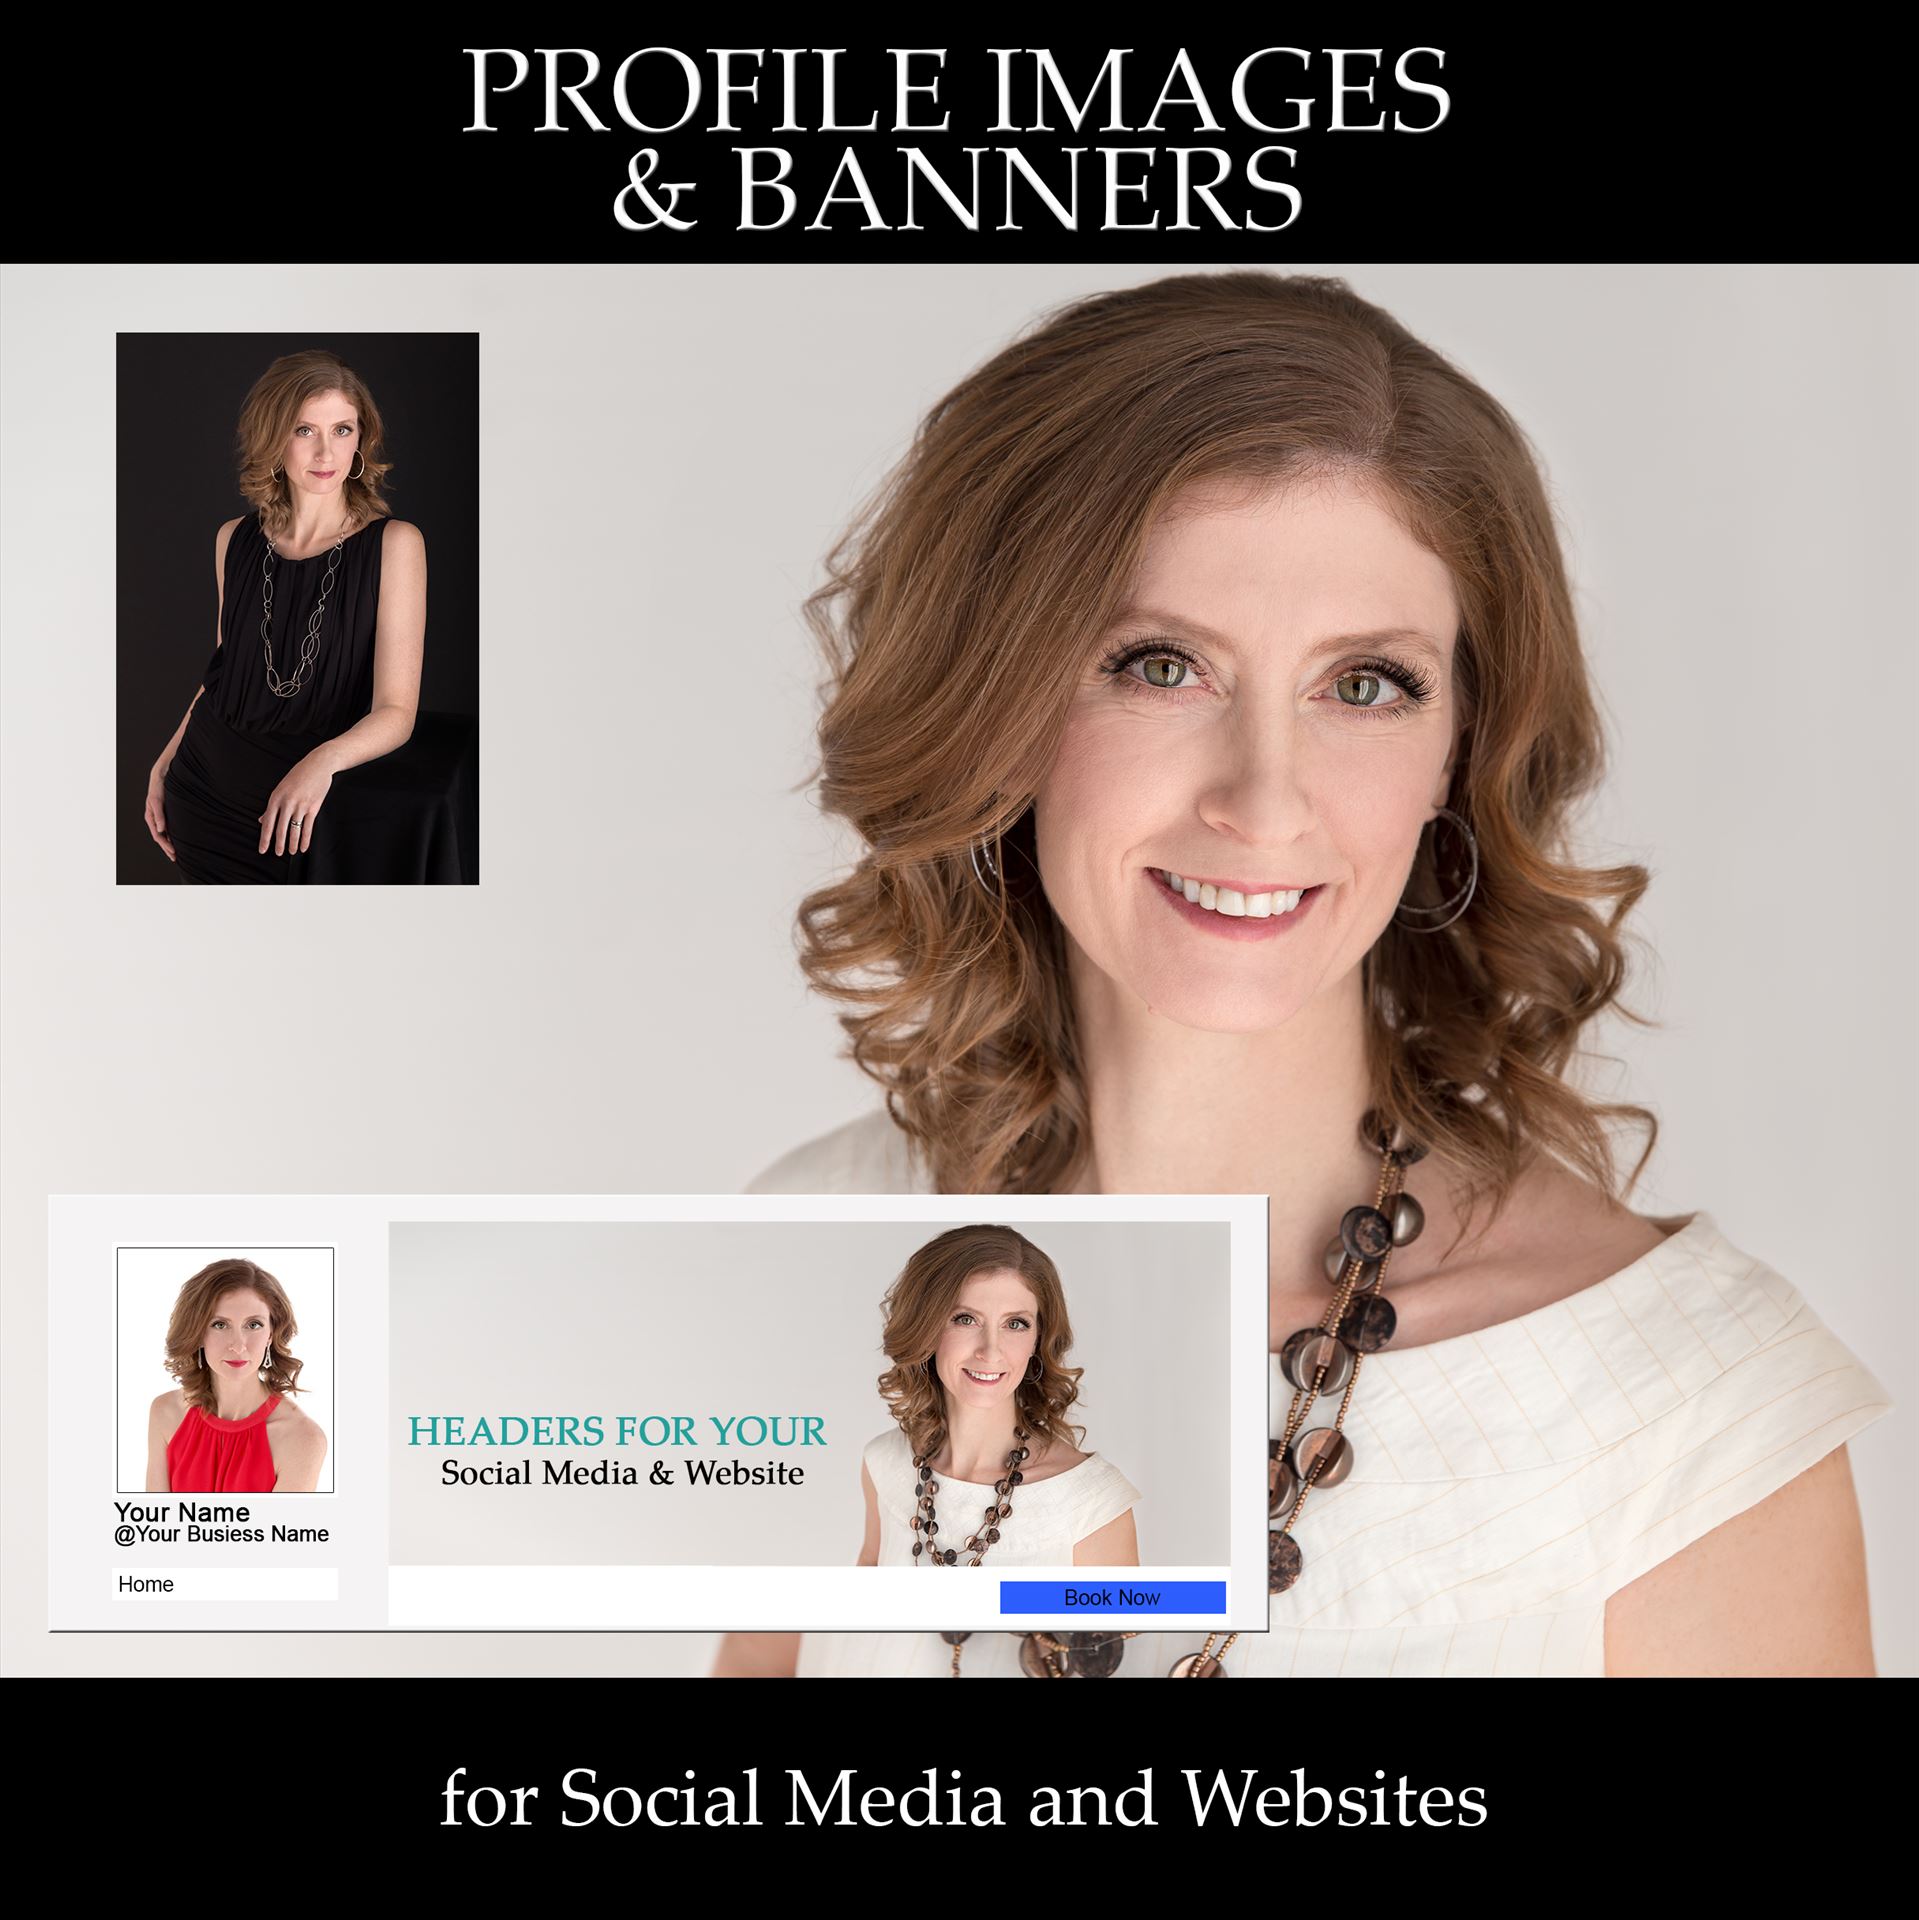 Profile-Images-and-Banners.jpg - beauty portraits, beauty, portrait, headshot, personal branding by Maria Angelopoulos Photogrpahy